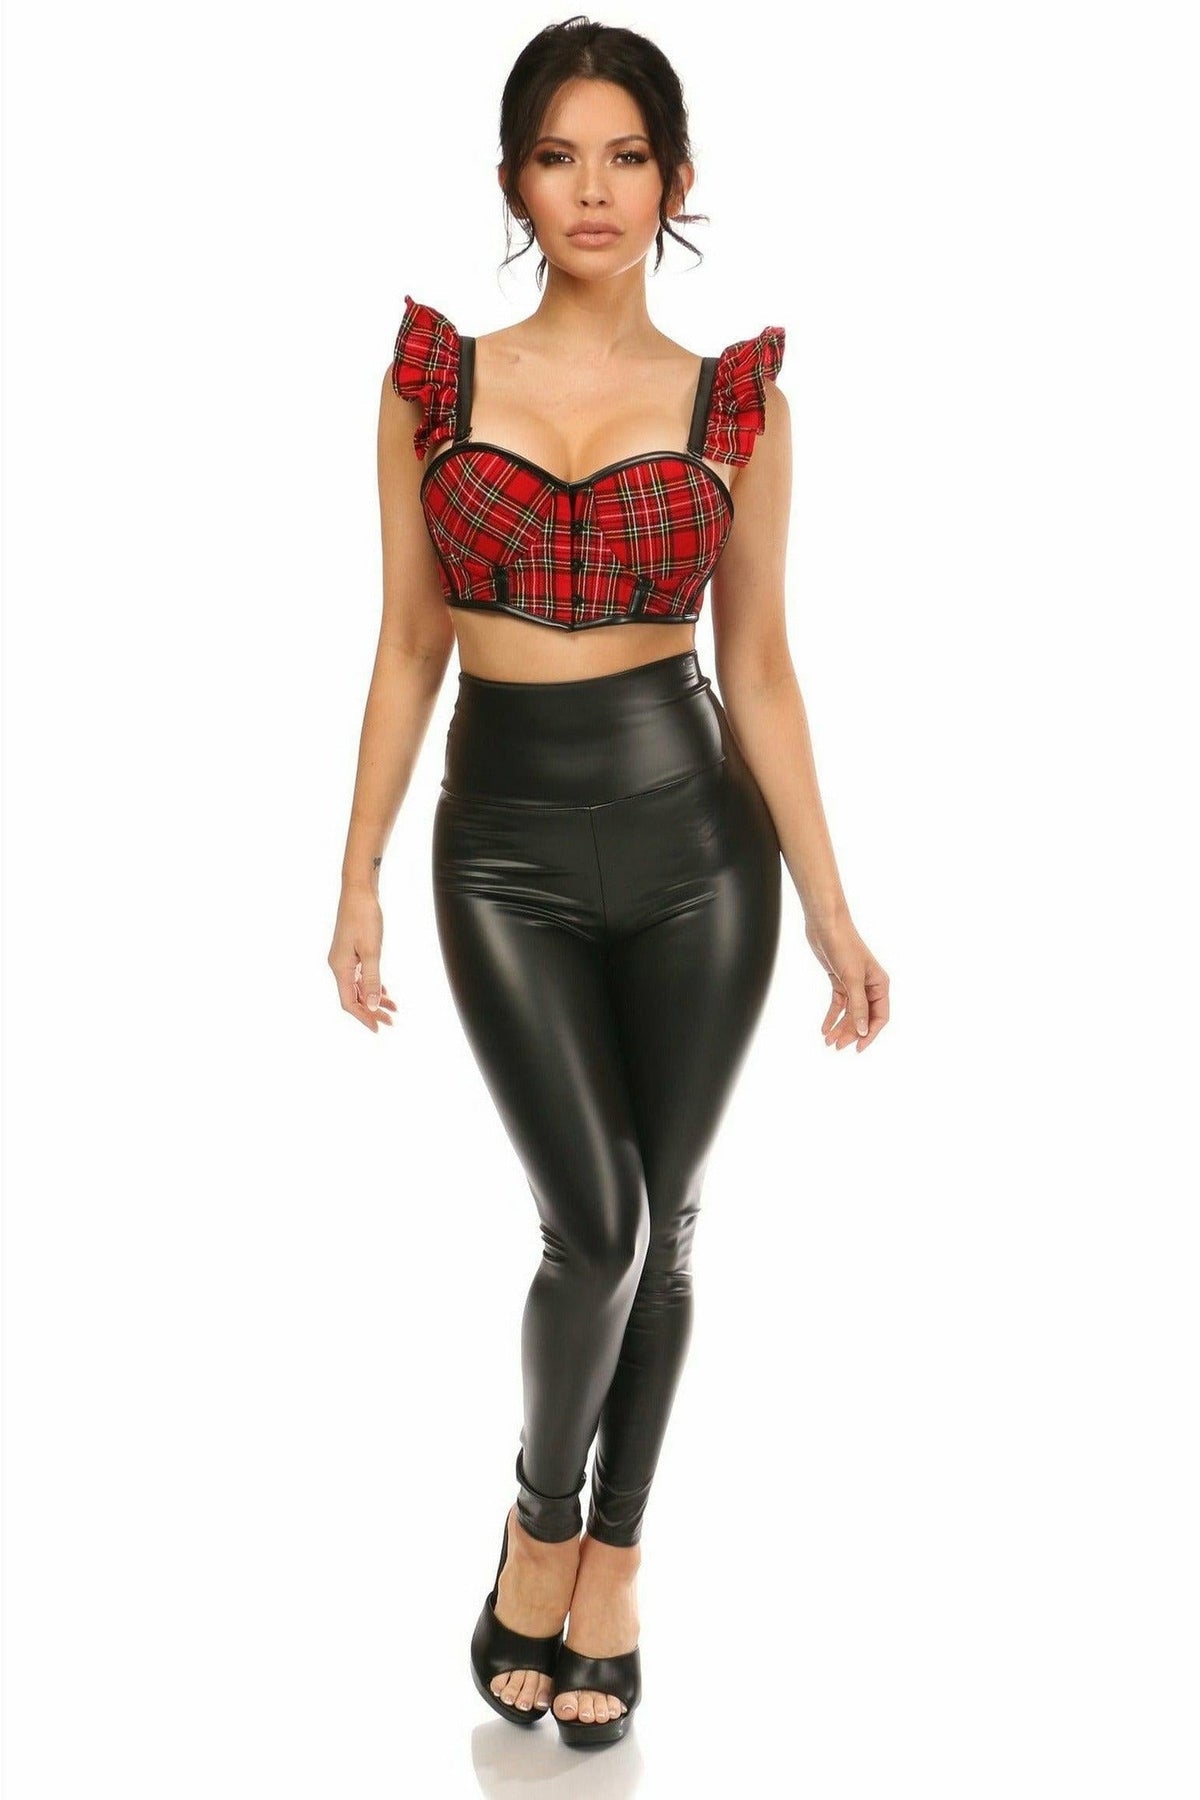 Lavish Red Plaid Underwire Bustier Top w/Removable Ruffle Sleeves-Daisy Corsets